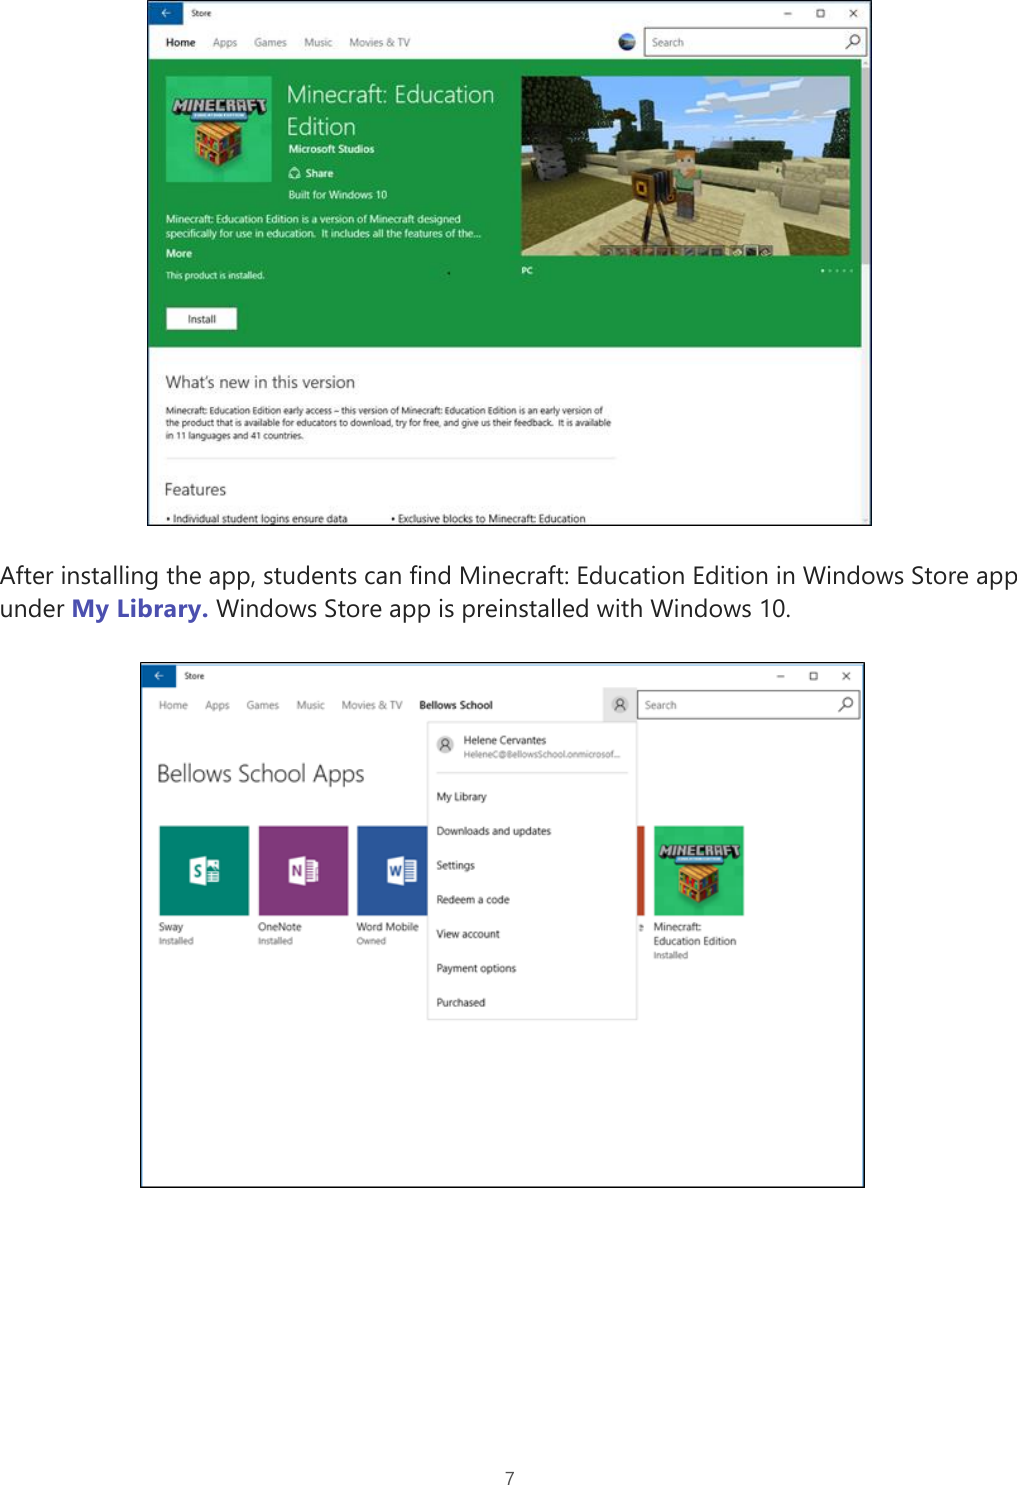 Page 7 of 11 - Microsoft Teams Team Leader Getting Started Guide MEE Educator Deployment